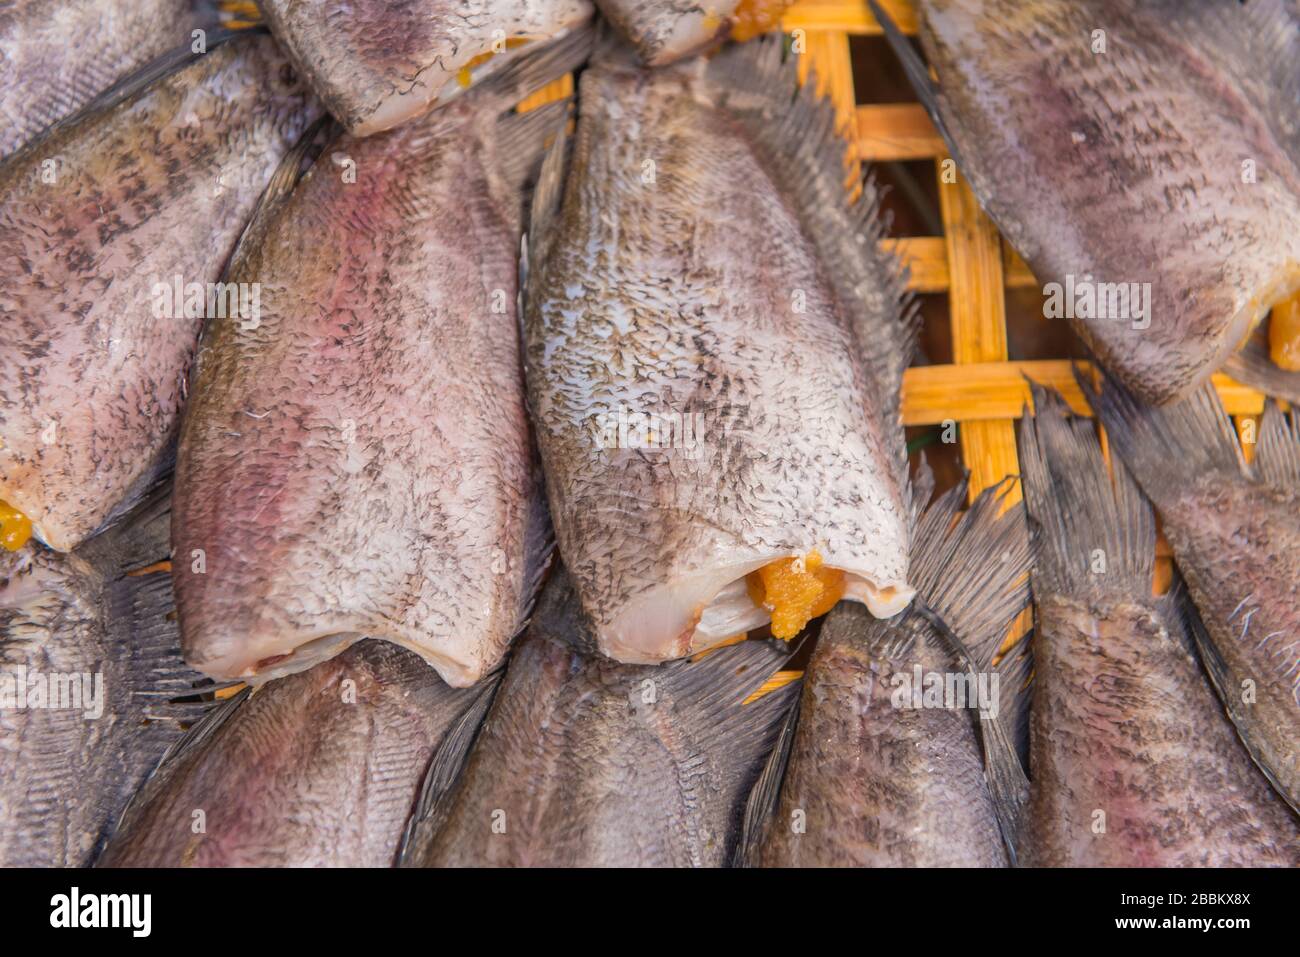 Trichogaster pectoralis, Dry fish out salty for cooking Stock Photo